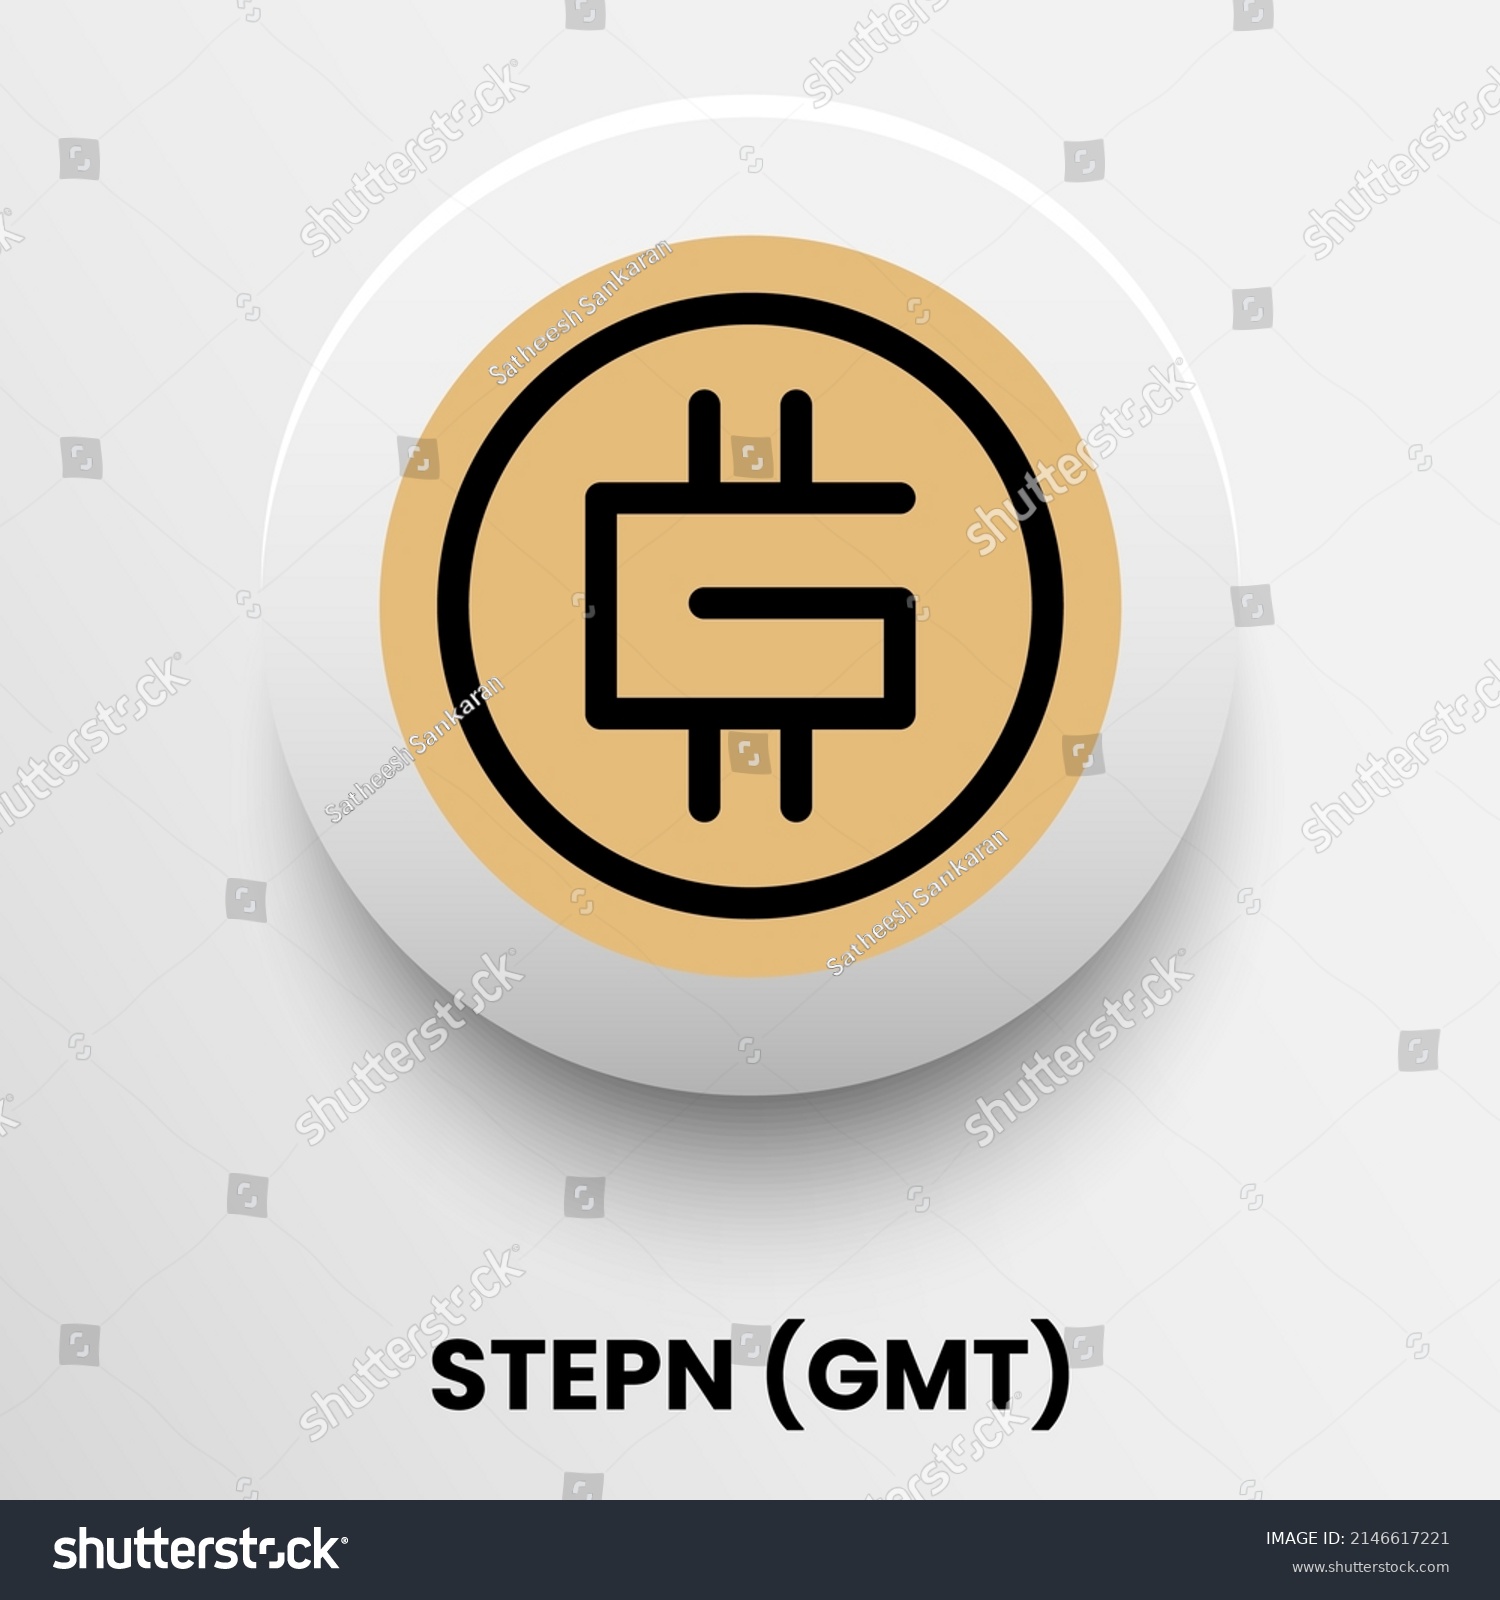 SVG of Blockchain based secure Cryptocurrency coin STEPN (GMT) icon isolated on colored background. Digital virtual money tokens. Decentralized finance technology illustration. Altcoin Vector logos. svg